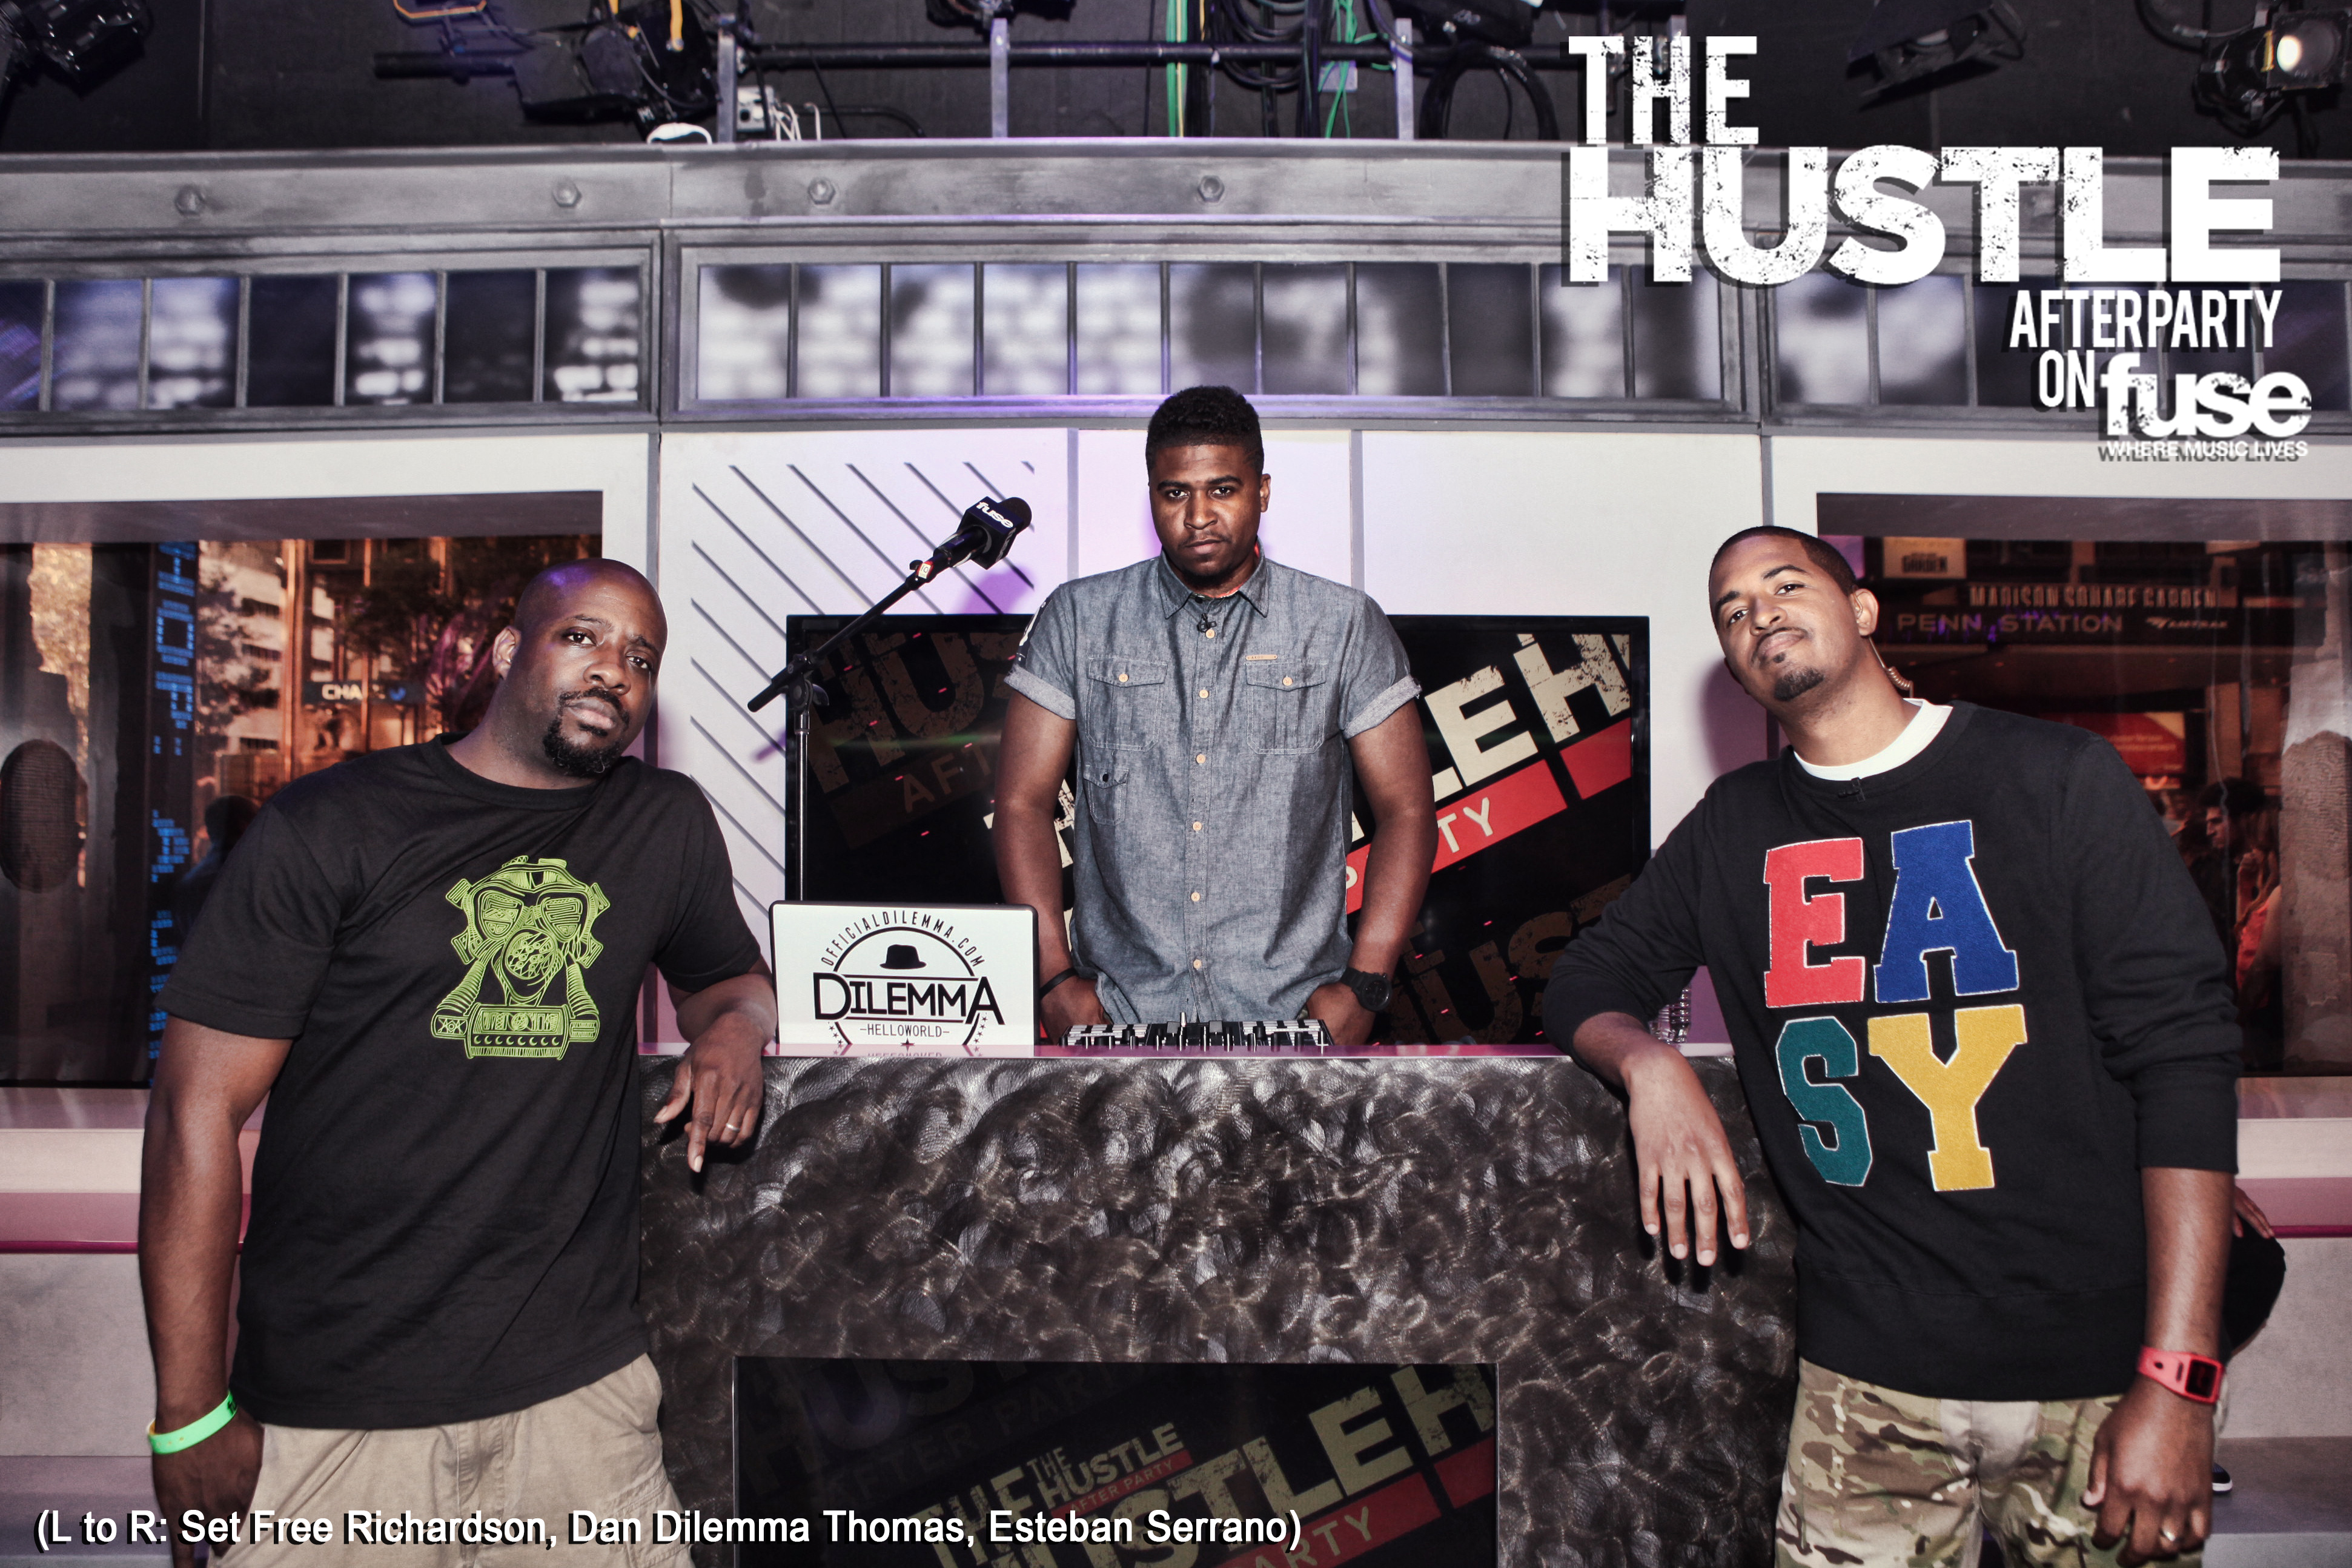 tune-in-to-fuse-tvs-the-hustle-after-party-ft-juicy-j-phillys-own-dilemma-at-1130pm-HHS1987-2013 Tune In To Fuse TV's "The Hustle After Party" Ft. Juicy J & Philly's own Dilemma at 11:30pm  